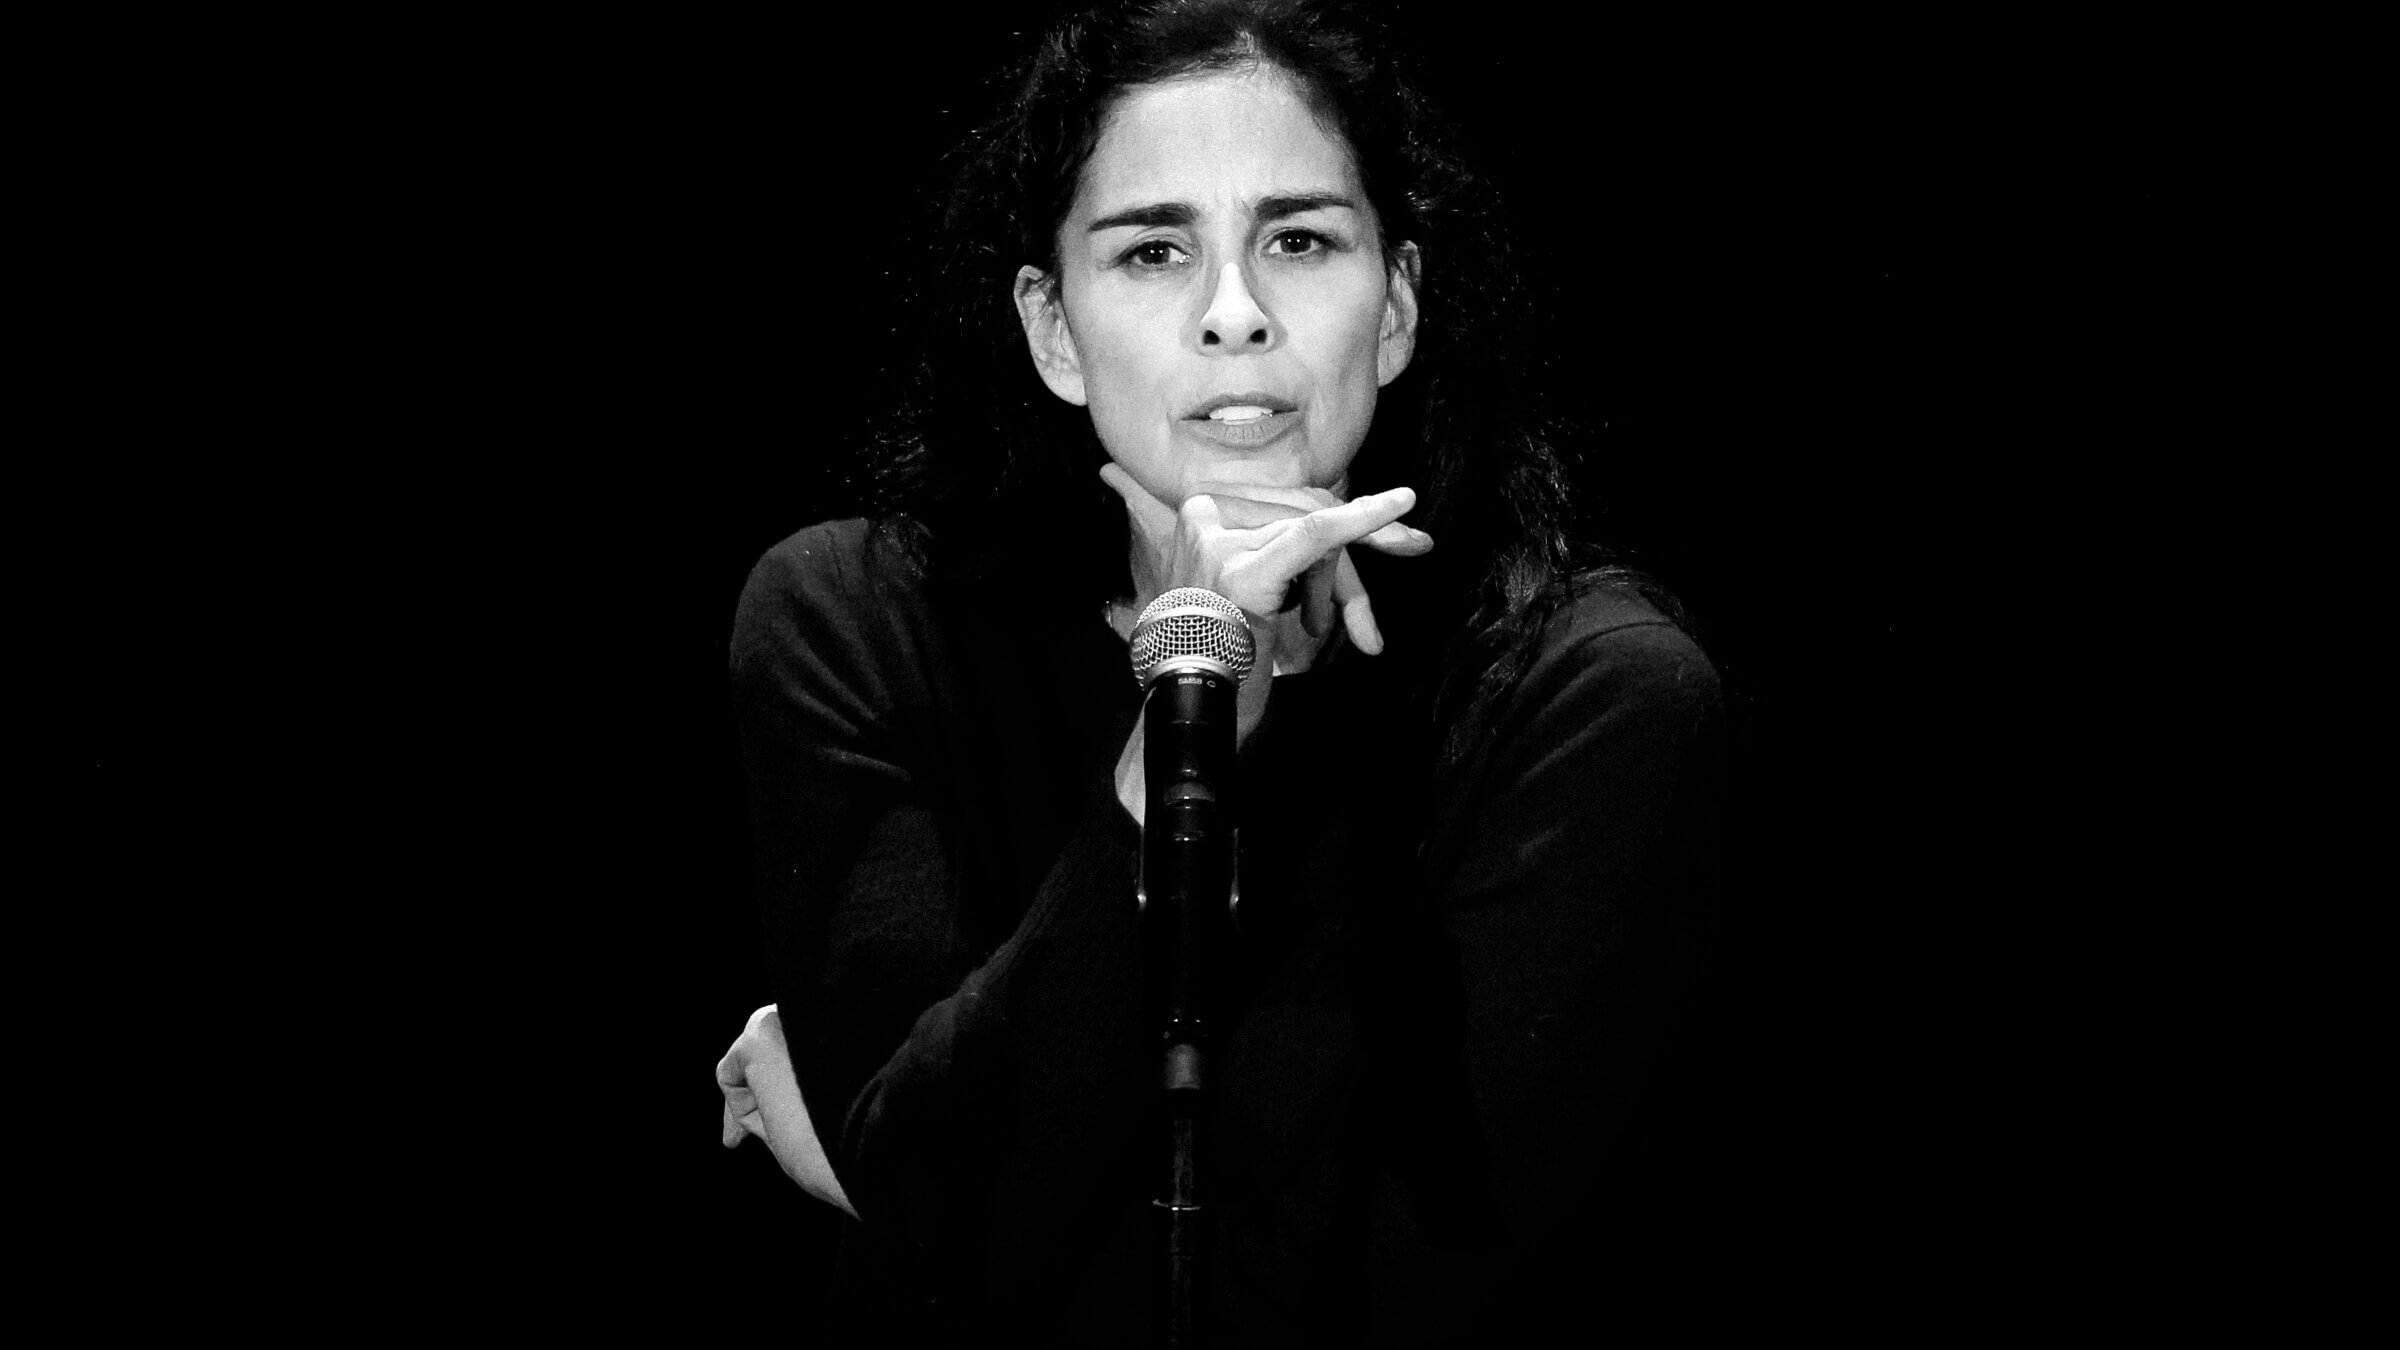 Sarah Silverman released a special episode of her podcast specifically about the war between Hamas and Israel.